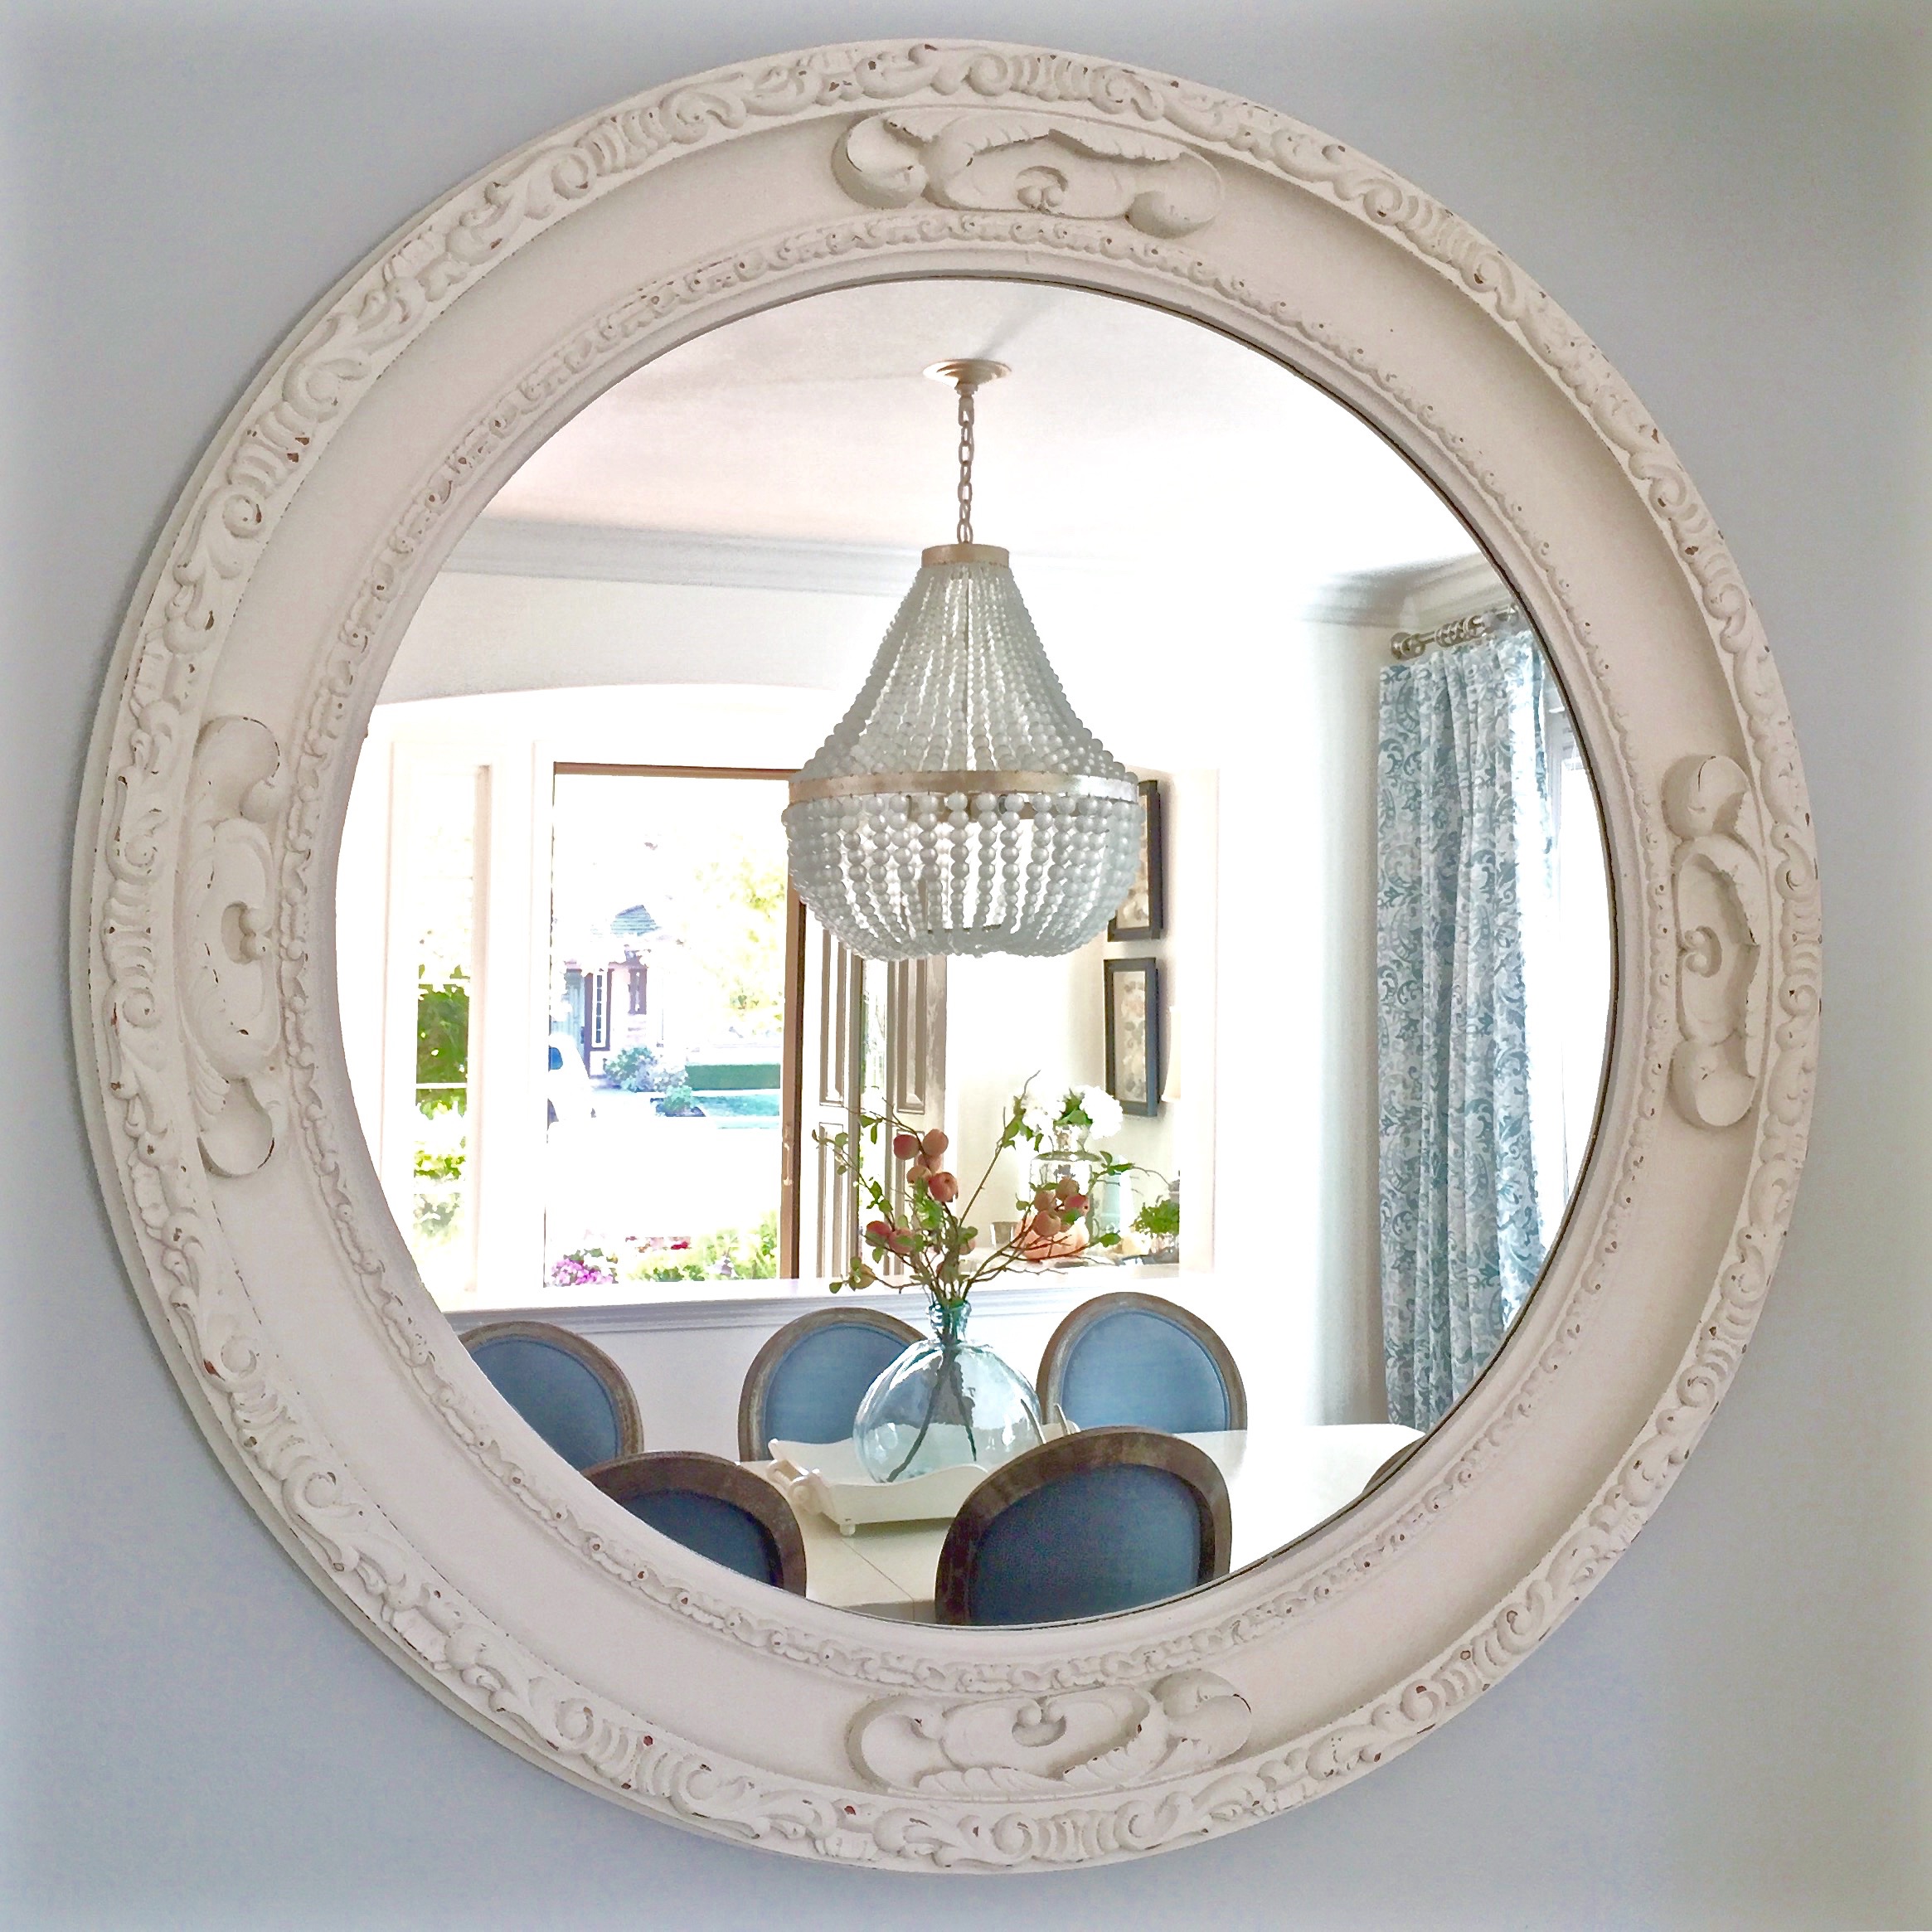 Blue and white dining room with Edisto white beaded chandelier from Kathy Kuo Home. https://kristywicks.com